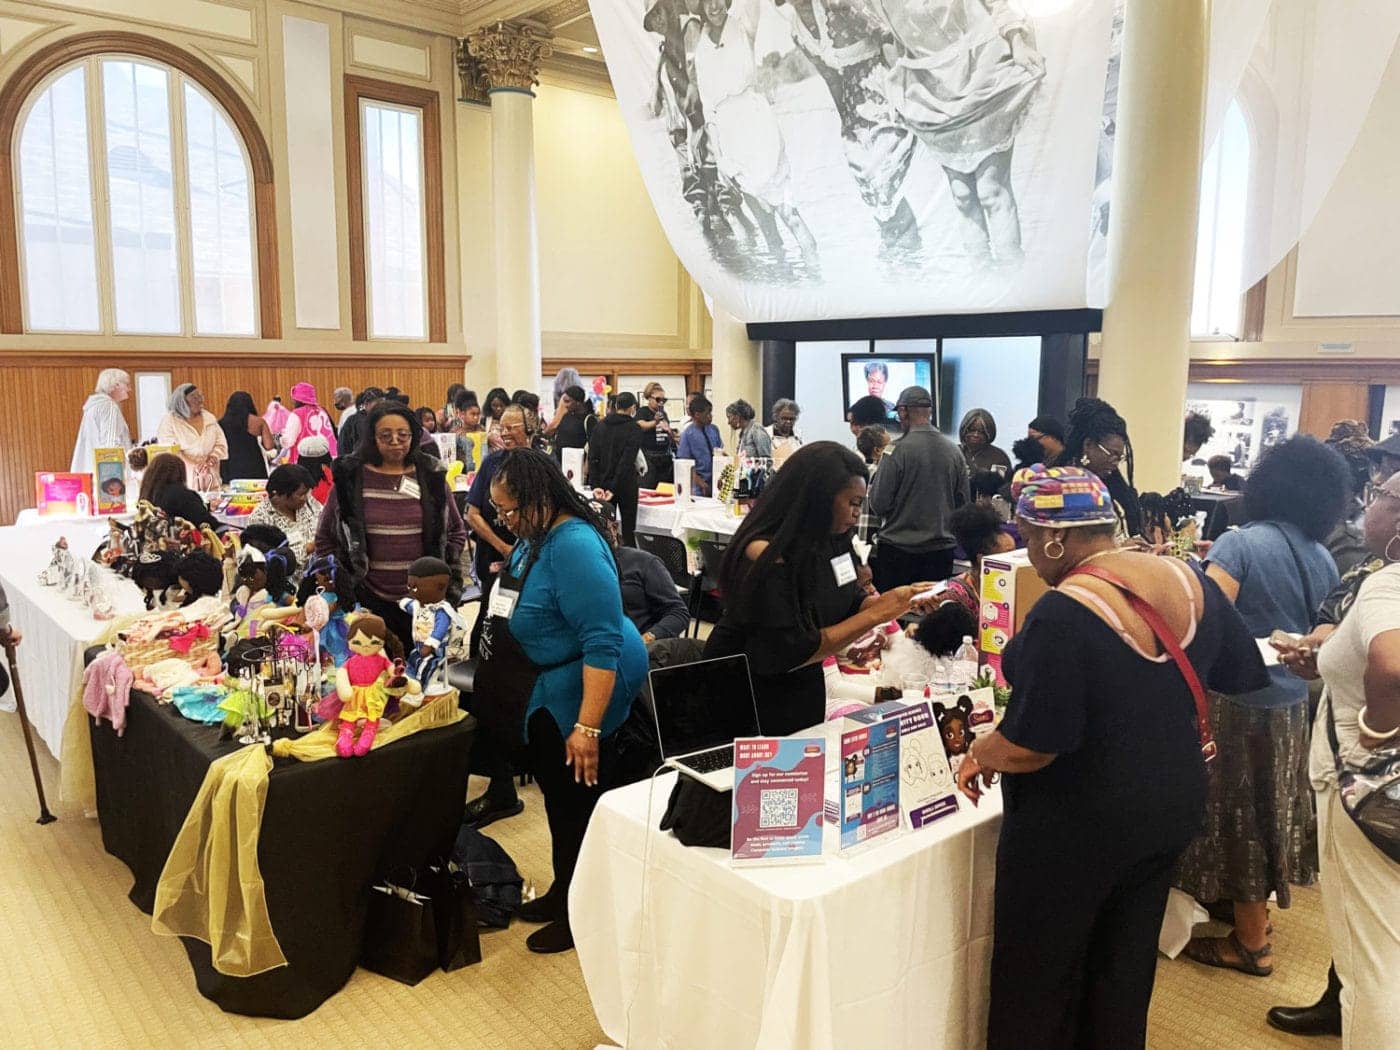 Black-Doll-Fest-dozen-doll-makers-AAMLO-110423-by-Daphne-1400x1050, Black Doll Festival visits Oakland’s African American Museum, Culture Currents World News & Views 